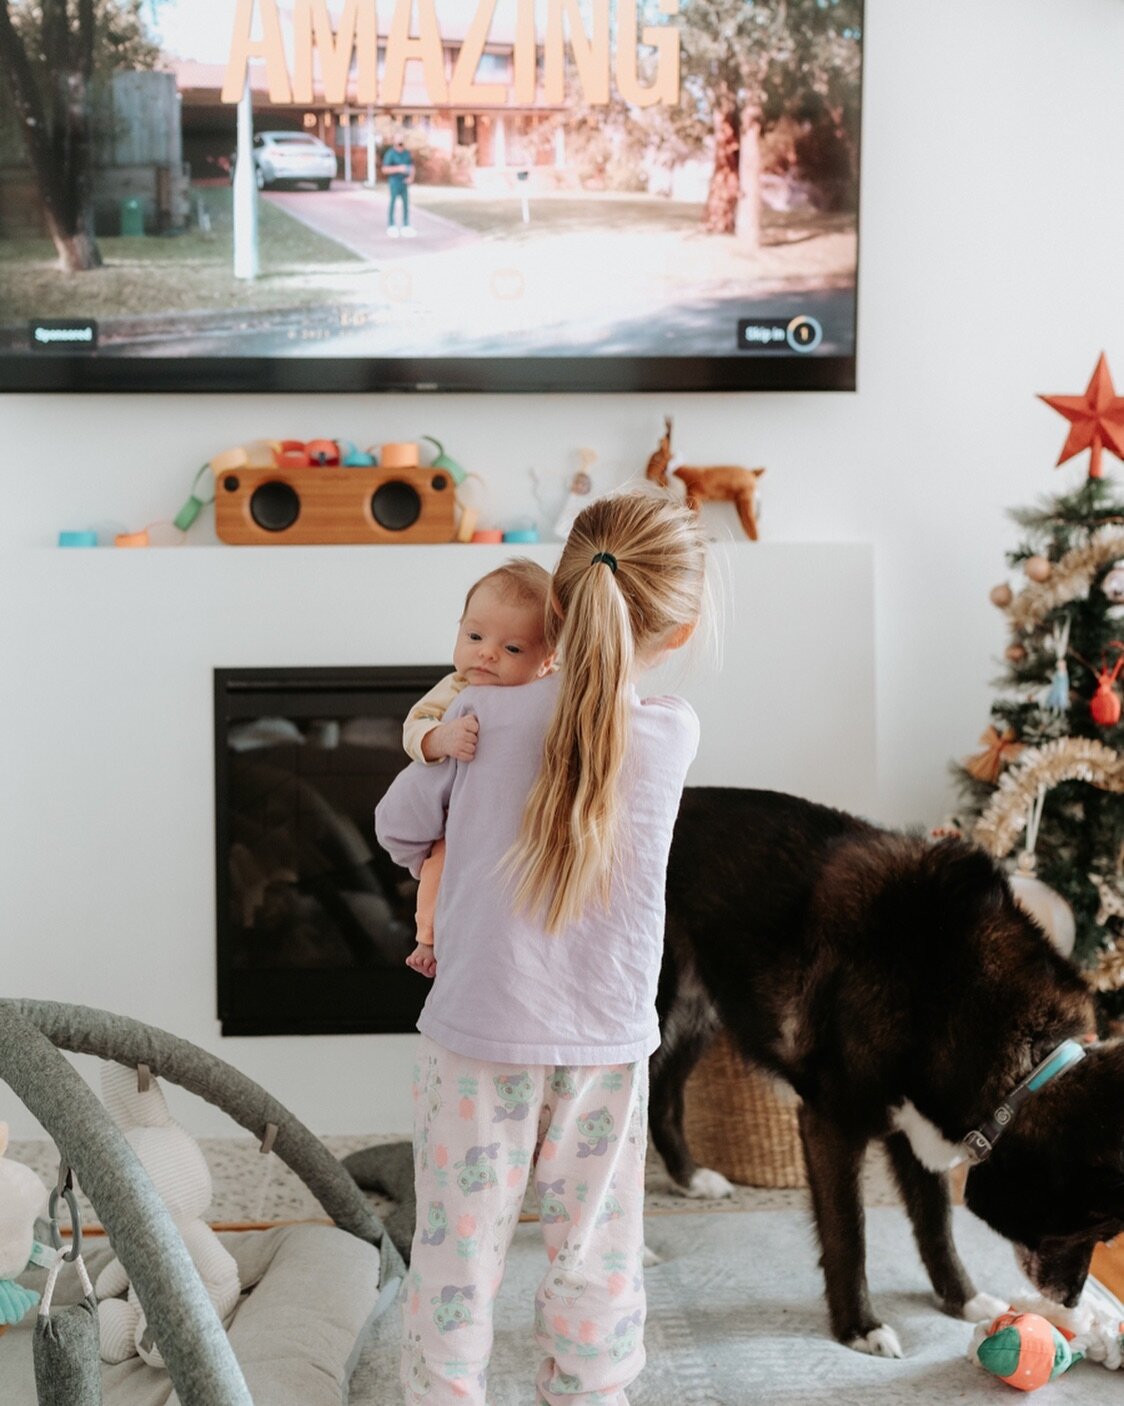 Life lately.
This shot sums up our post partum days pretty well. Newborn is the only one in the house not wearing pjs, Christmas tree decorated creatively by our five year old. The dog, playing with a Christmas toy, random clutter and of course the w